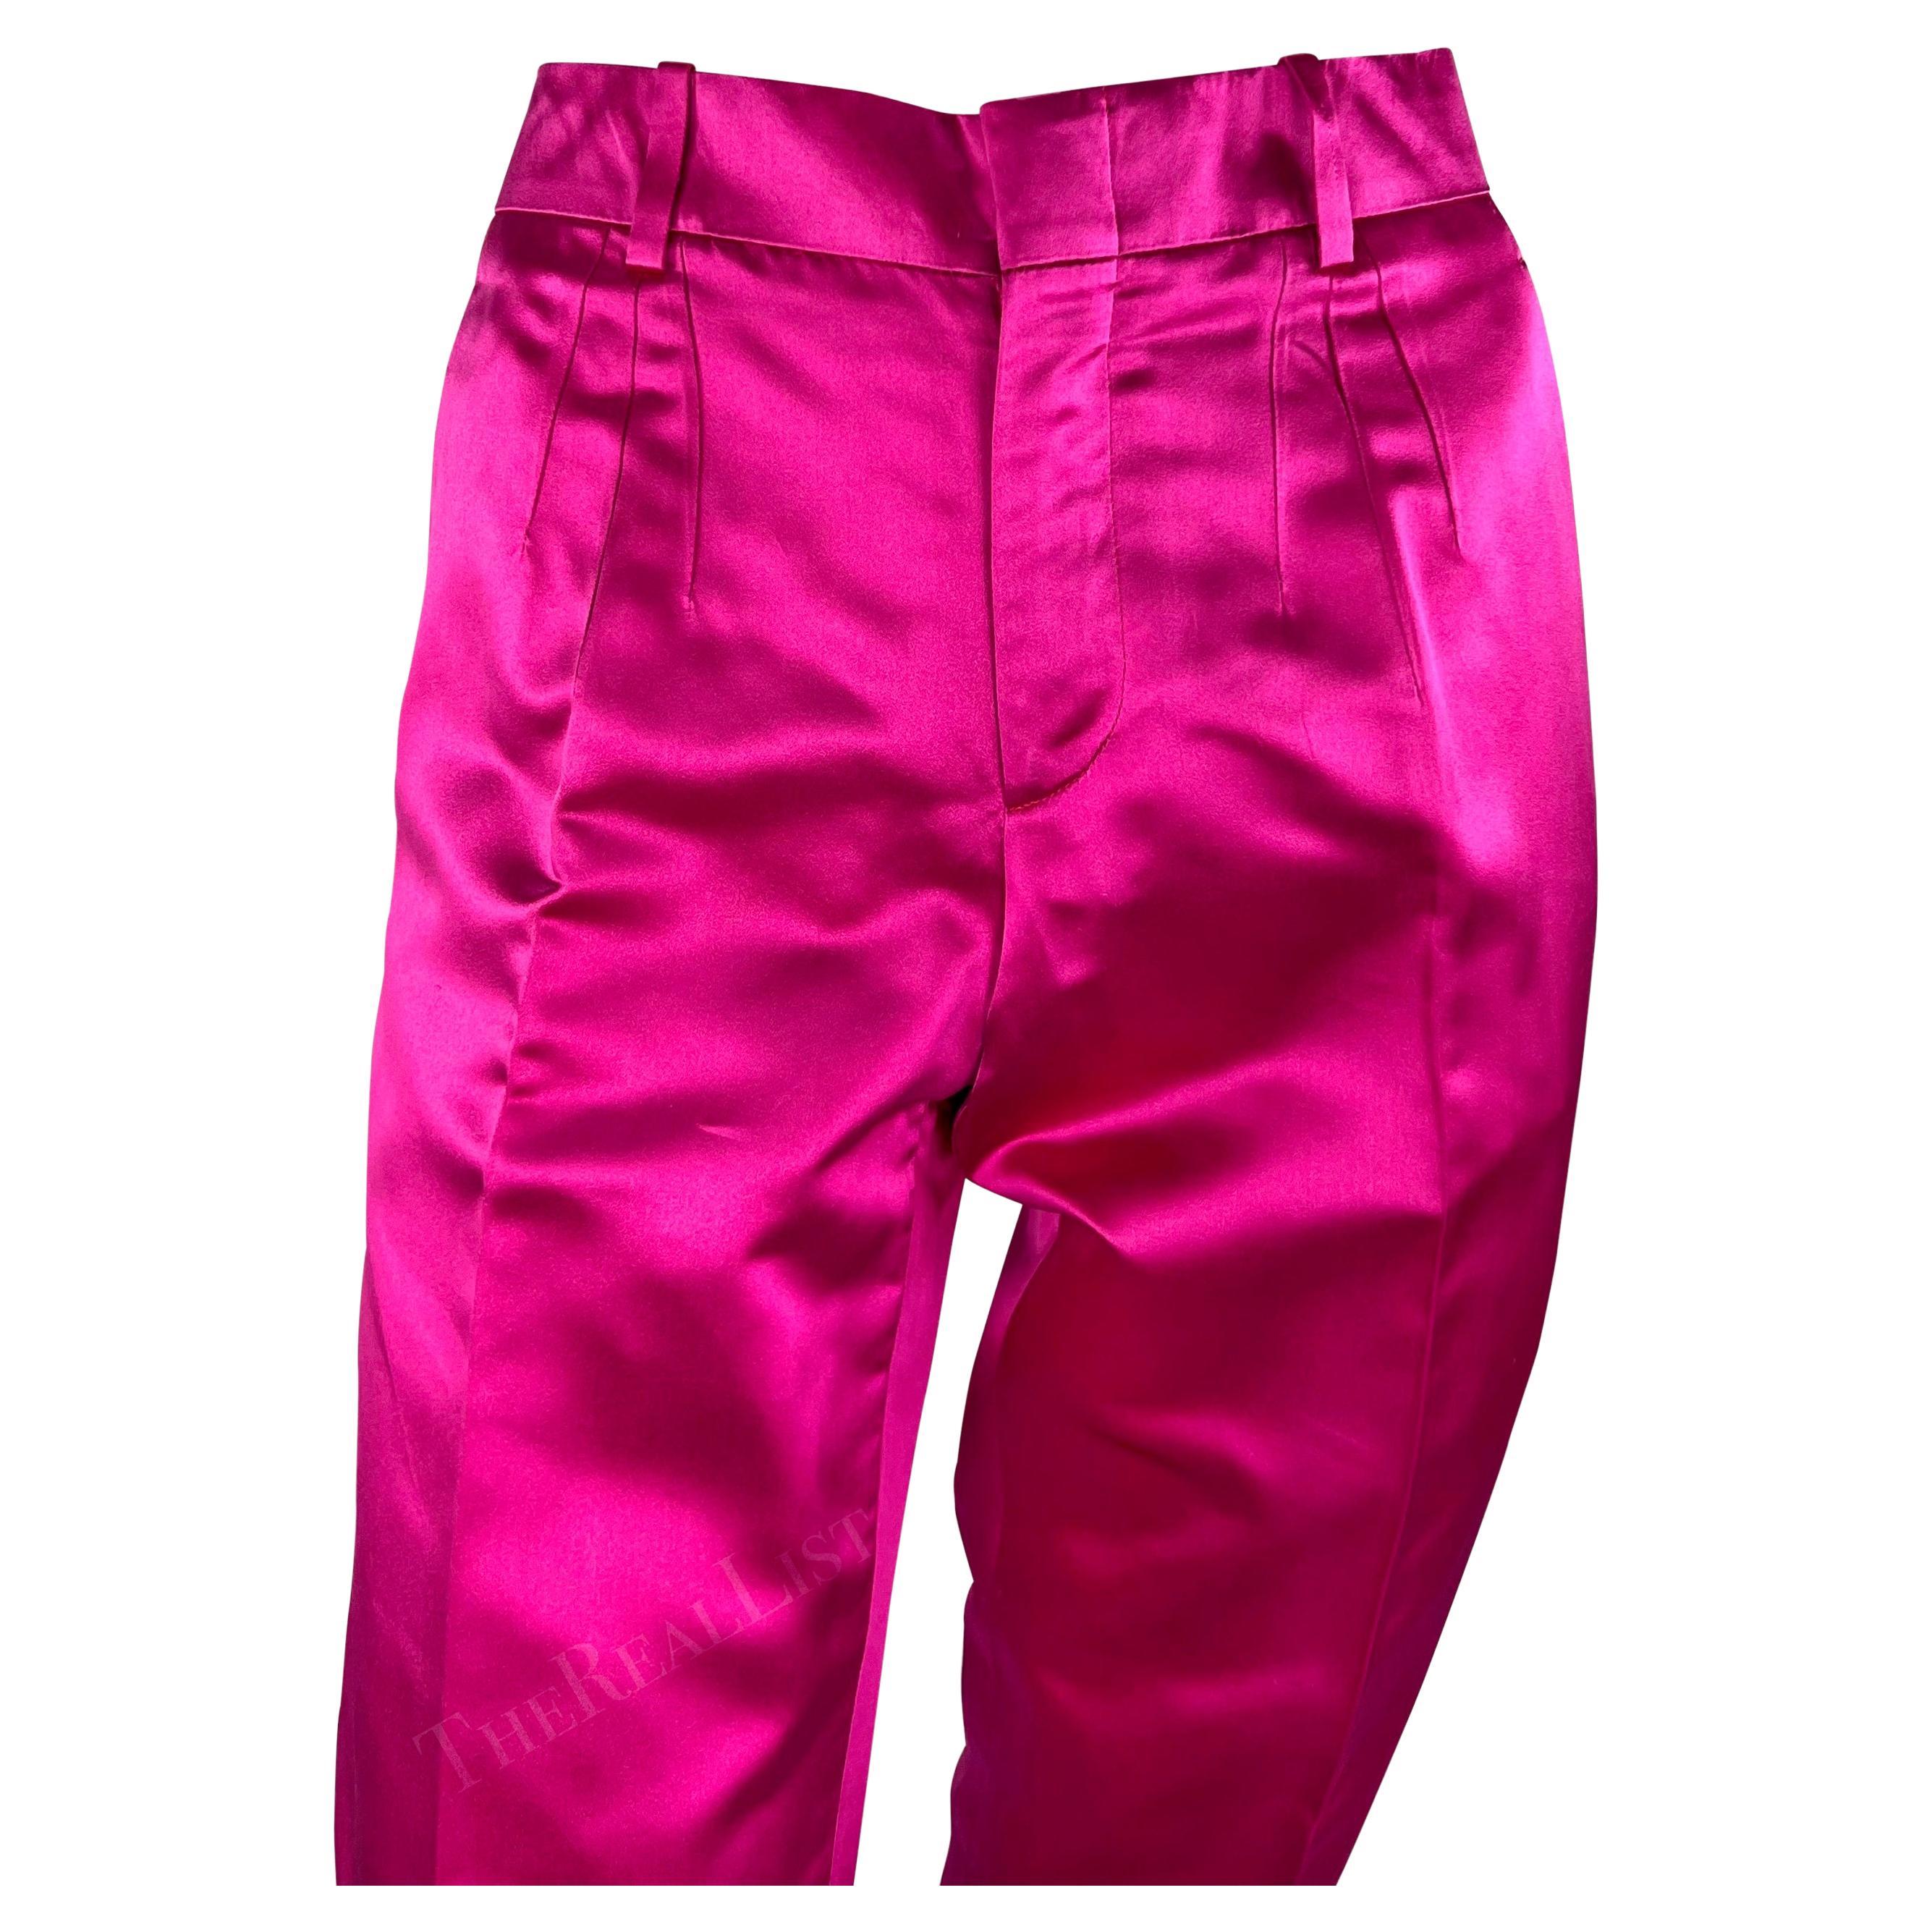 S/S 2001 Gucci by Tom Ford Runway Hot Pink Satin Silk Blend Tapered Pants In Excellent Condition For Sale In West Hollywood, CA